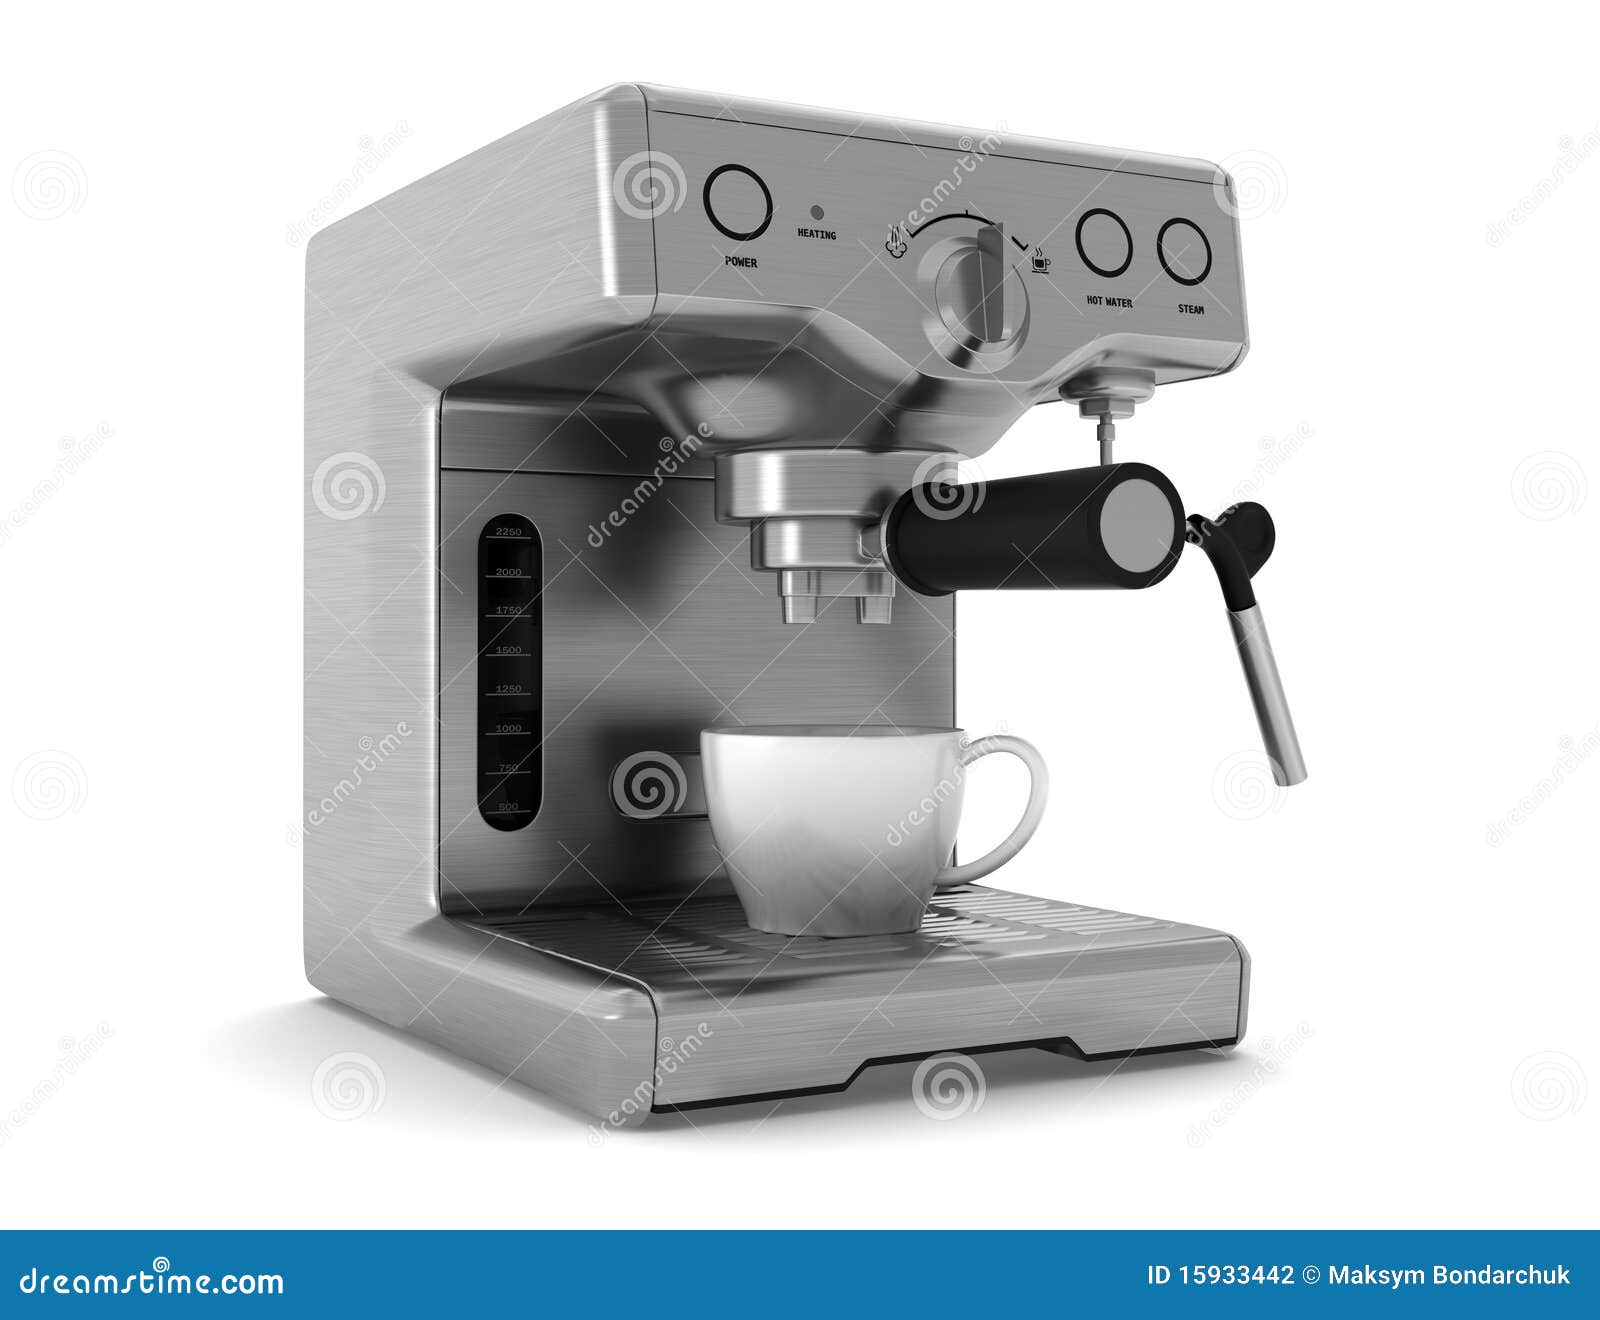 https://thumbs.dreamstime.com/z/coffee-machine-isolated-white-background-15933442.jpg